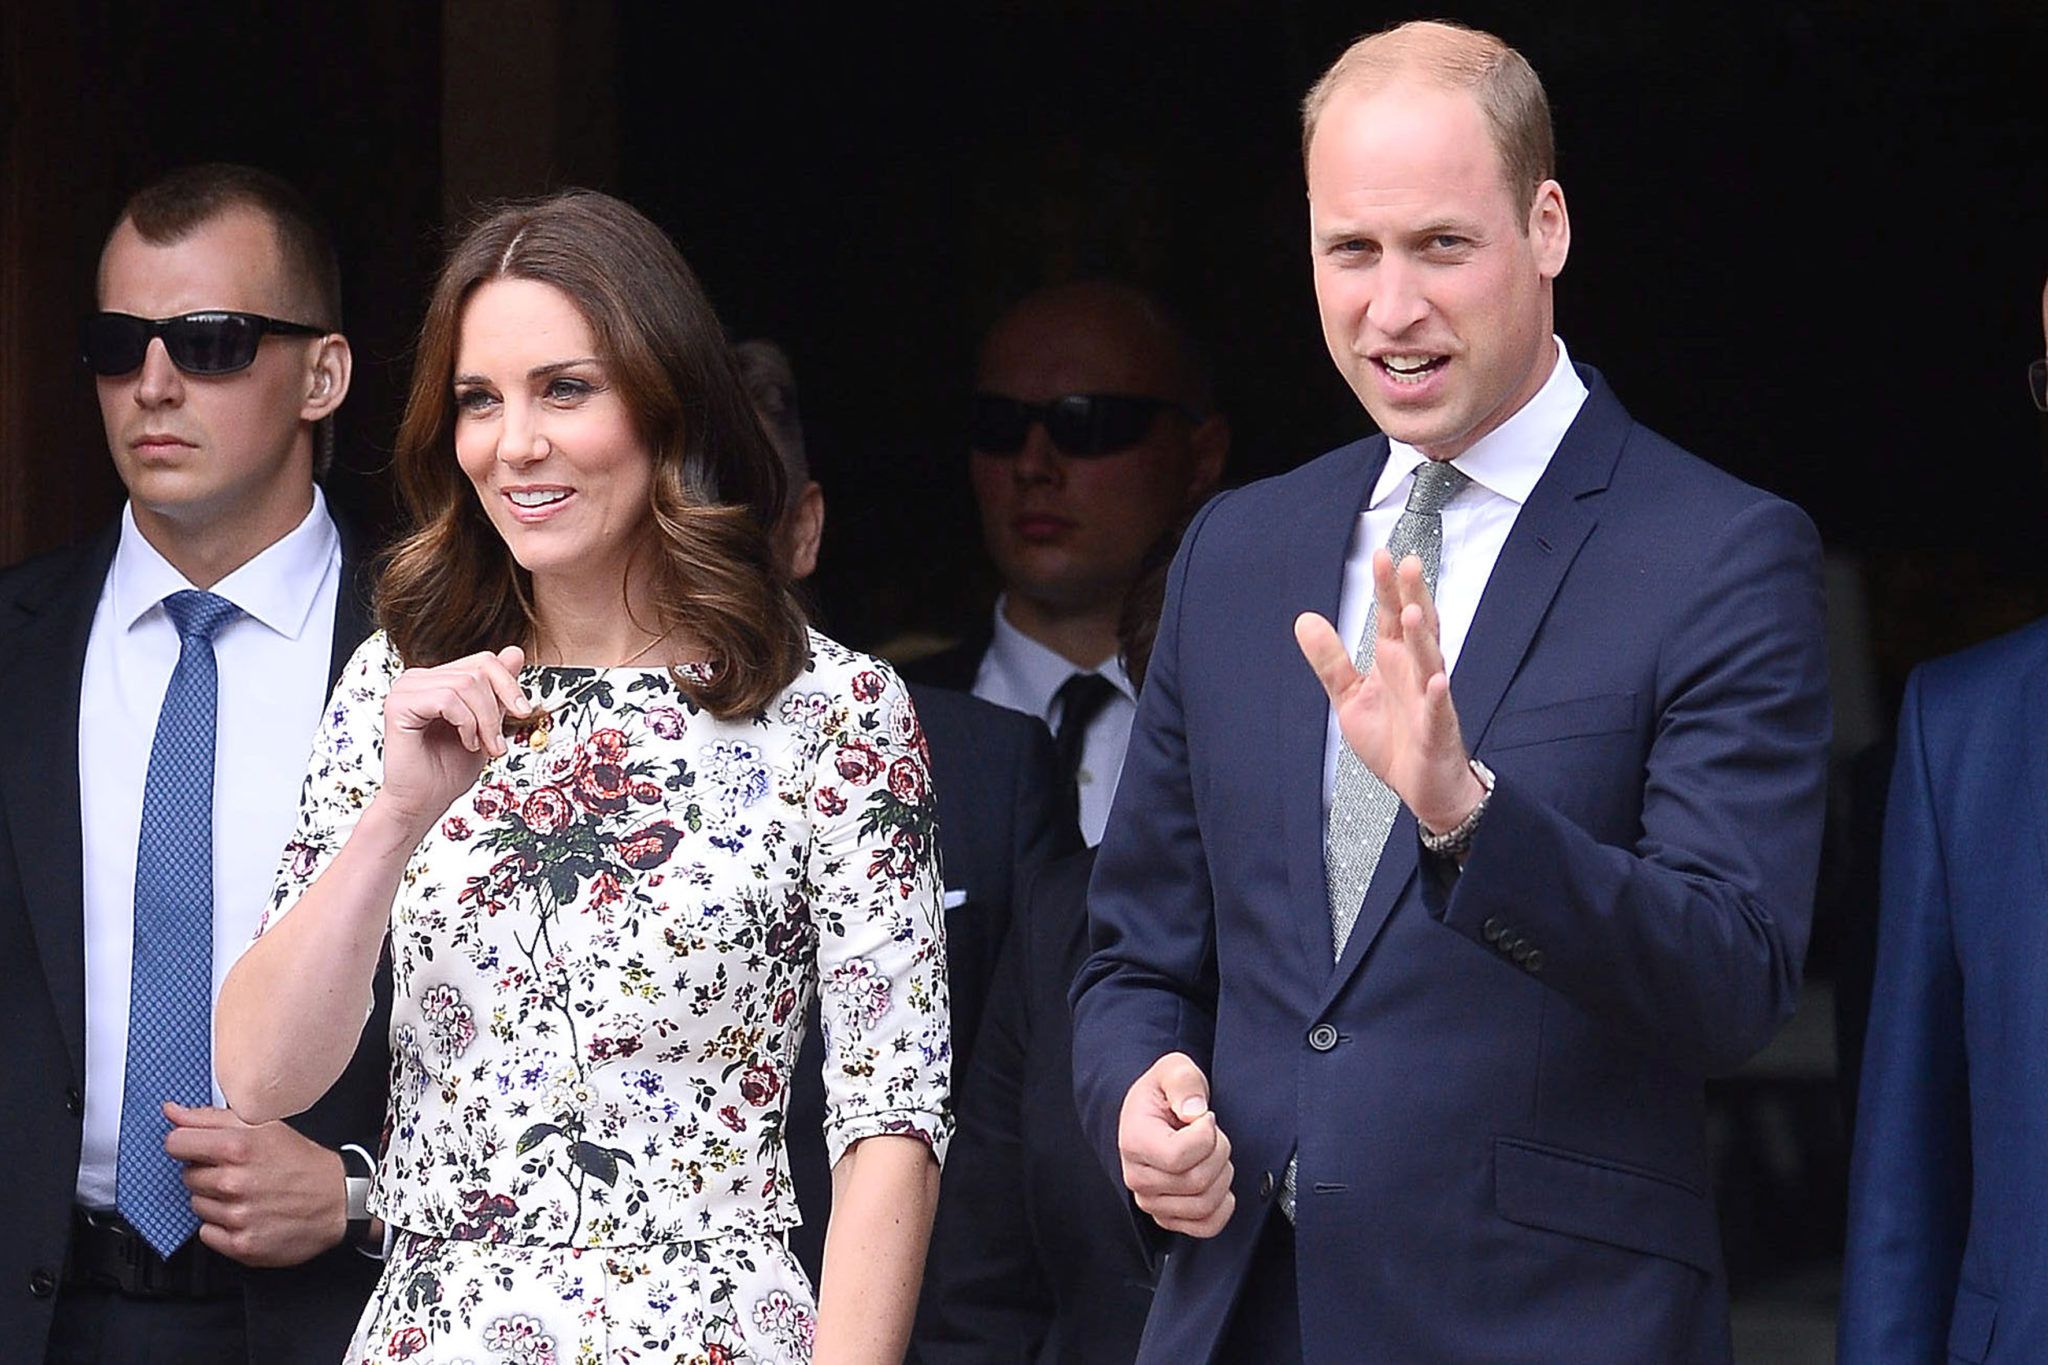 It has been confirmed that William and Kate will visit four Irish counties in March